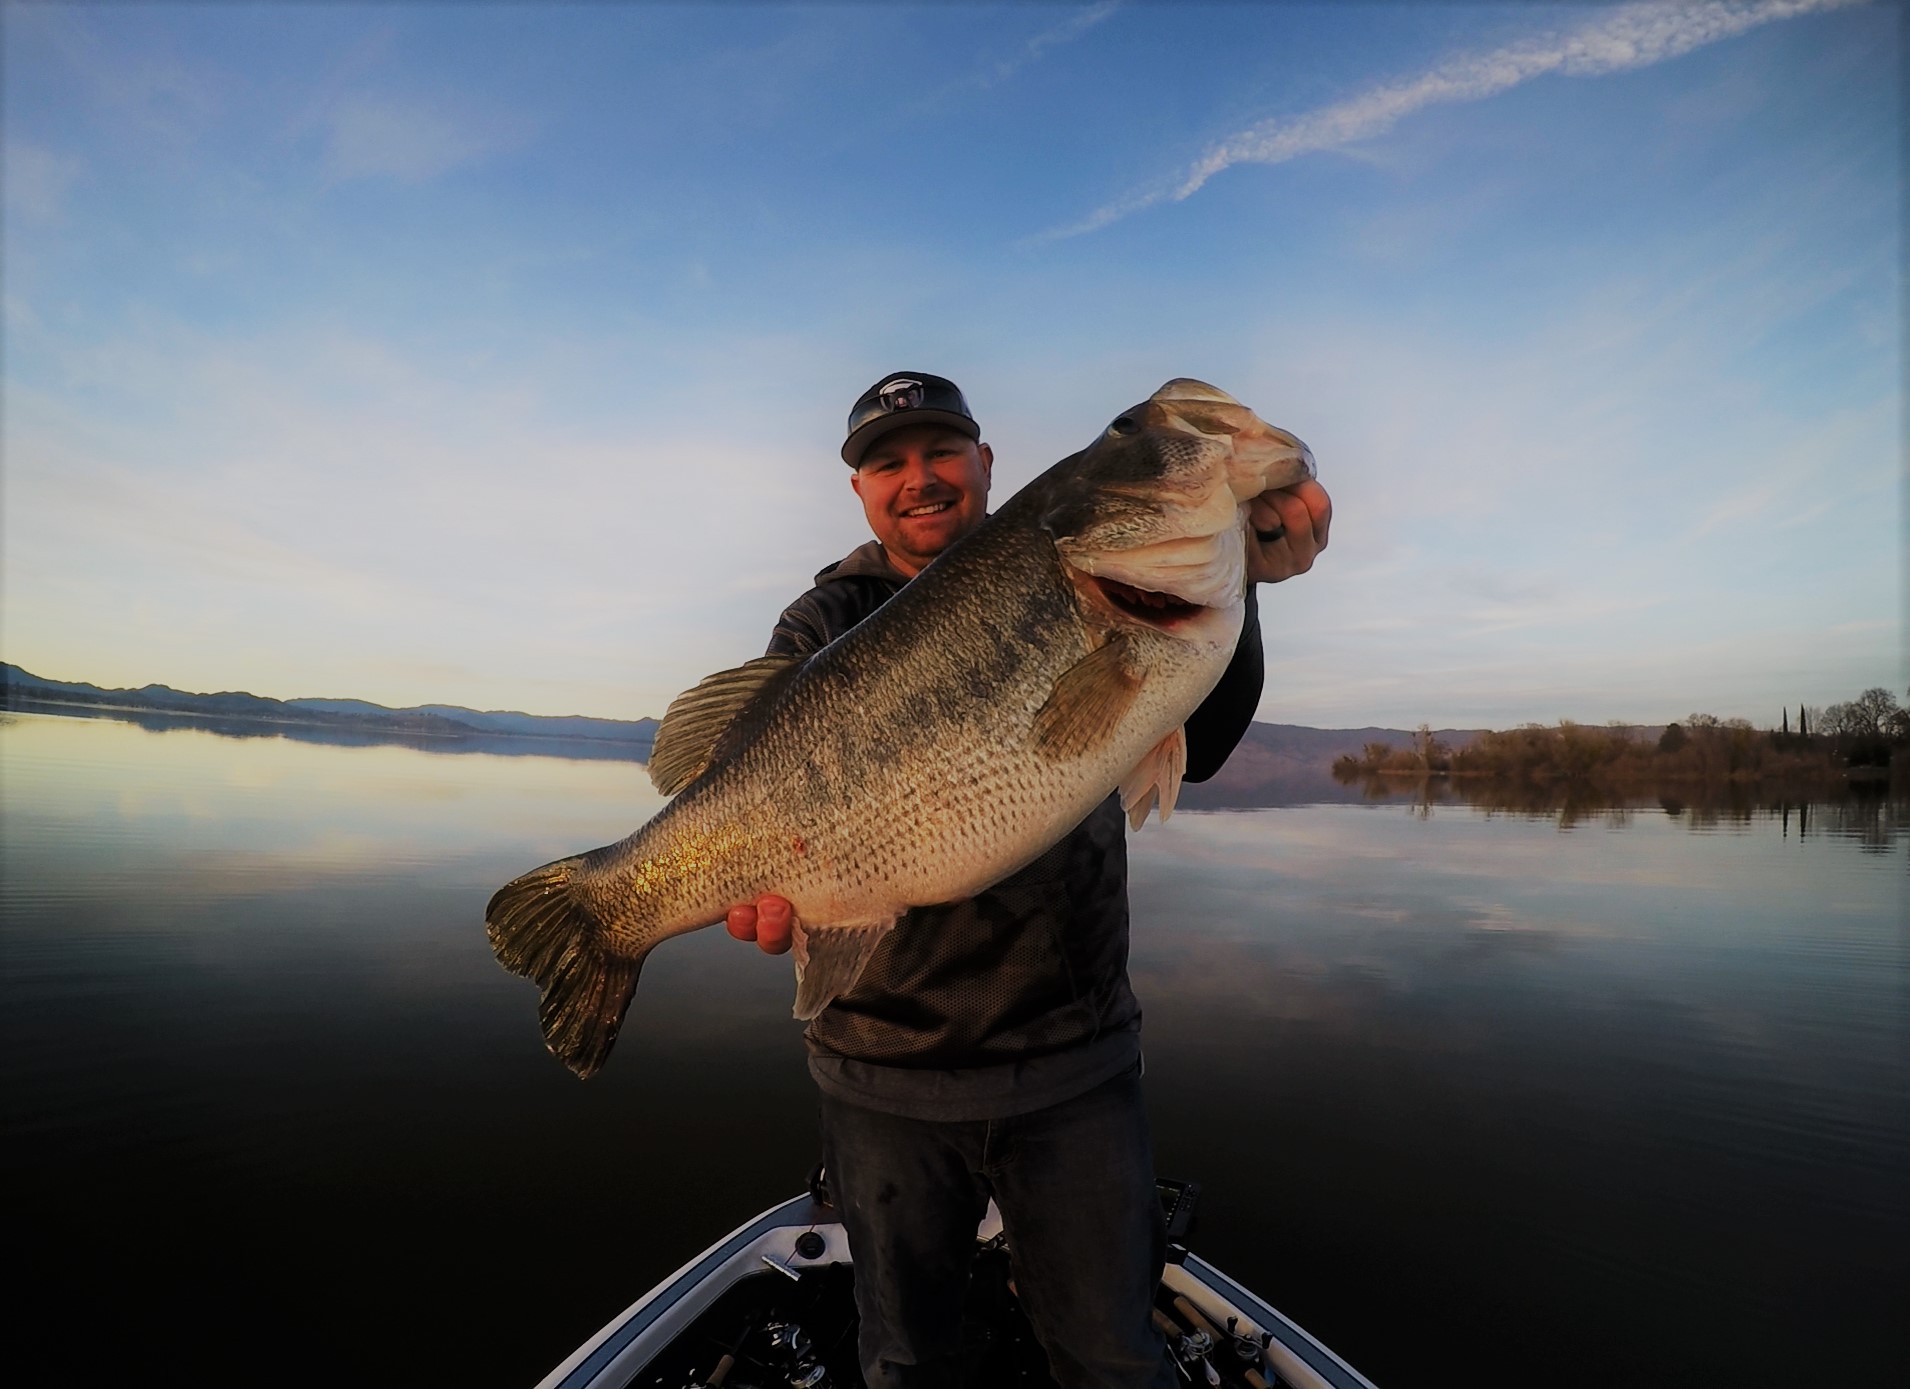 10 Pounder on the Lipless Crankbait! — Tactical Bassin' - Bass Fishing Blog